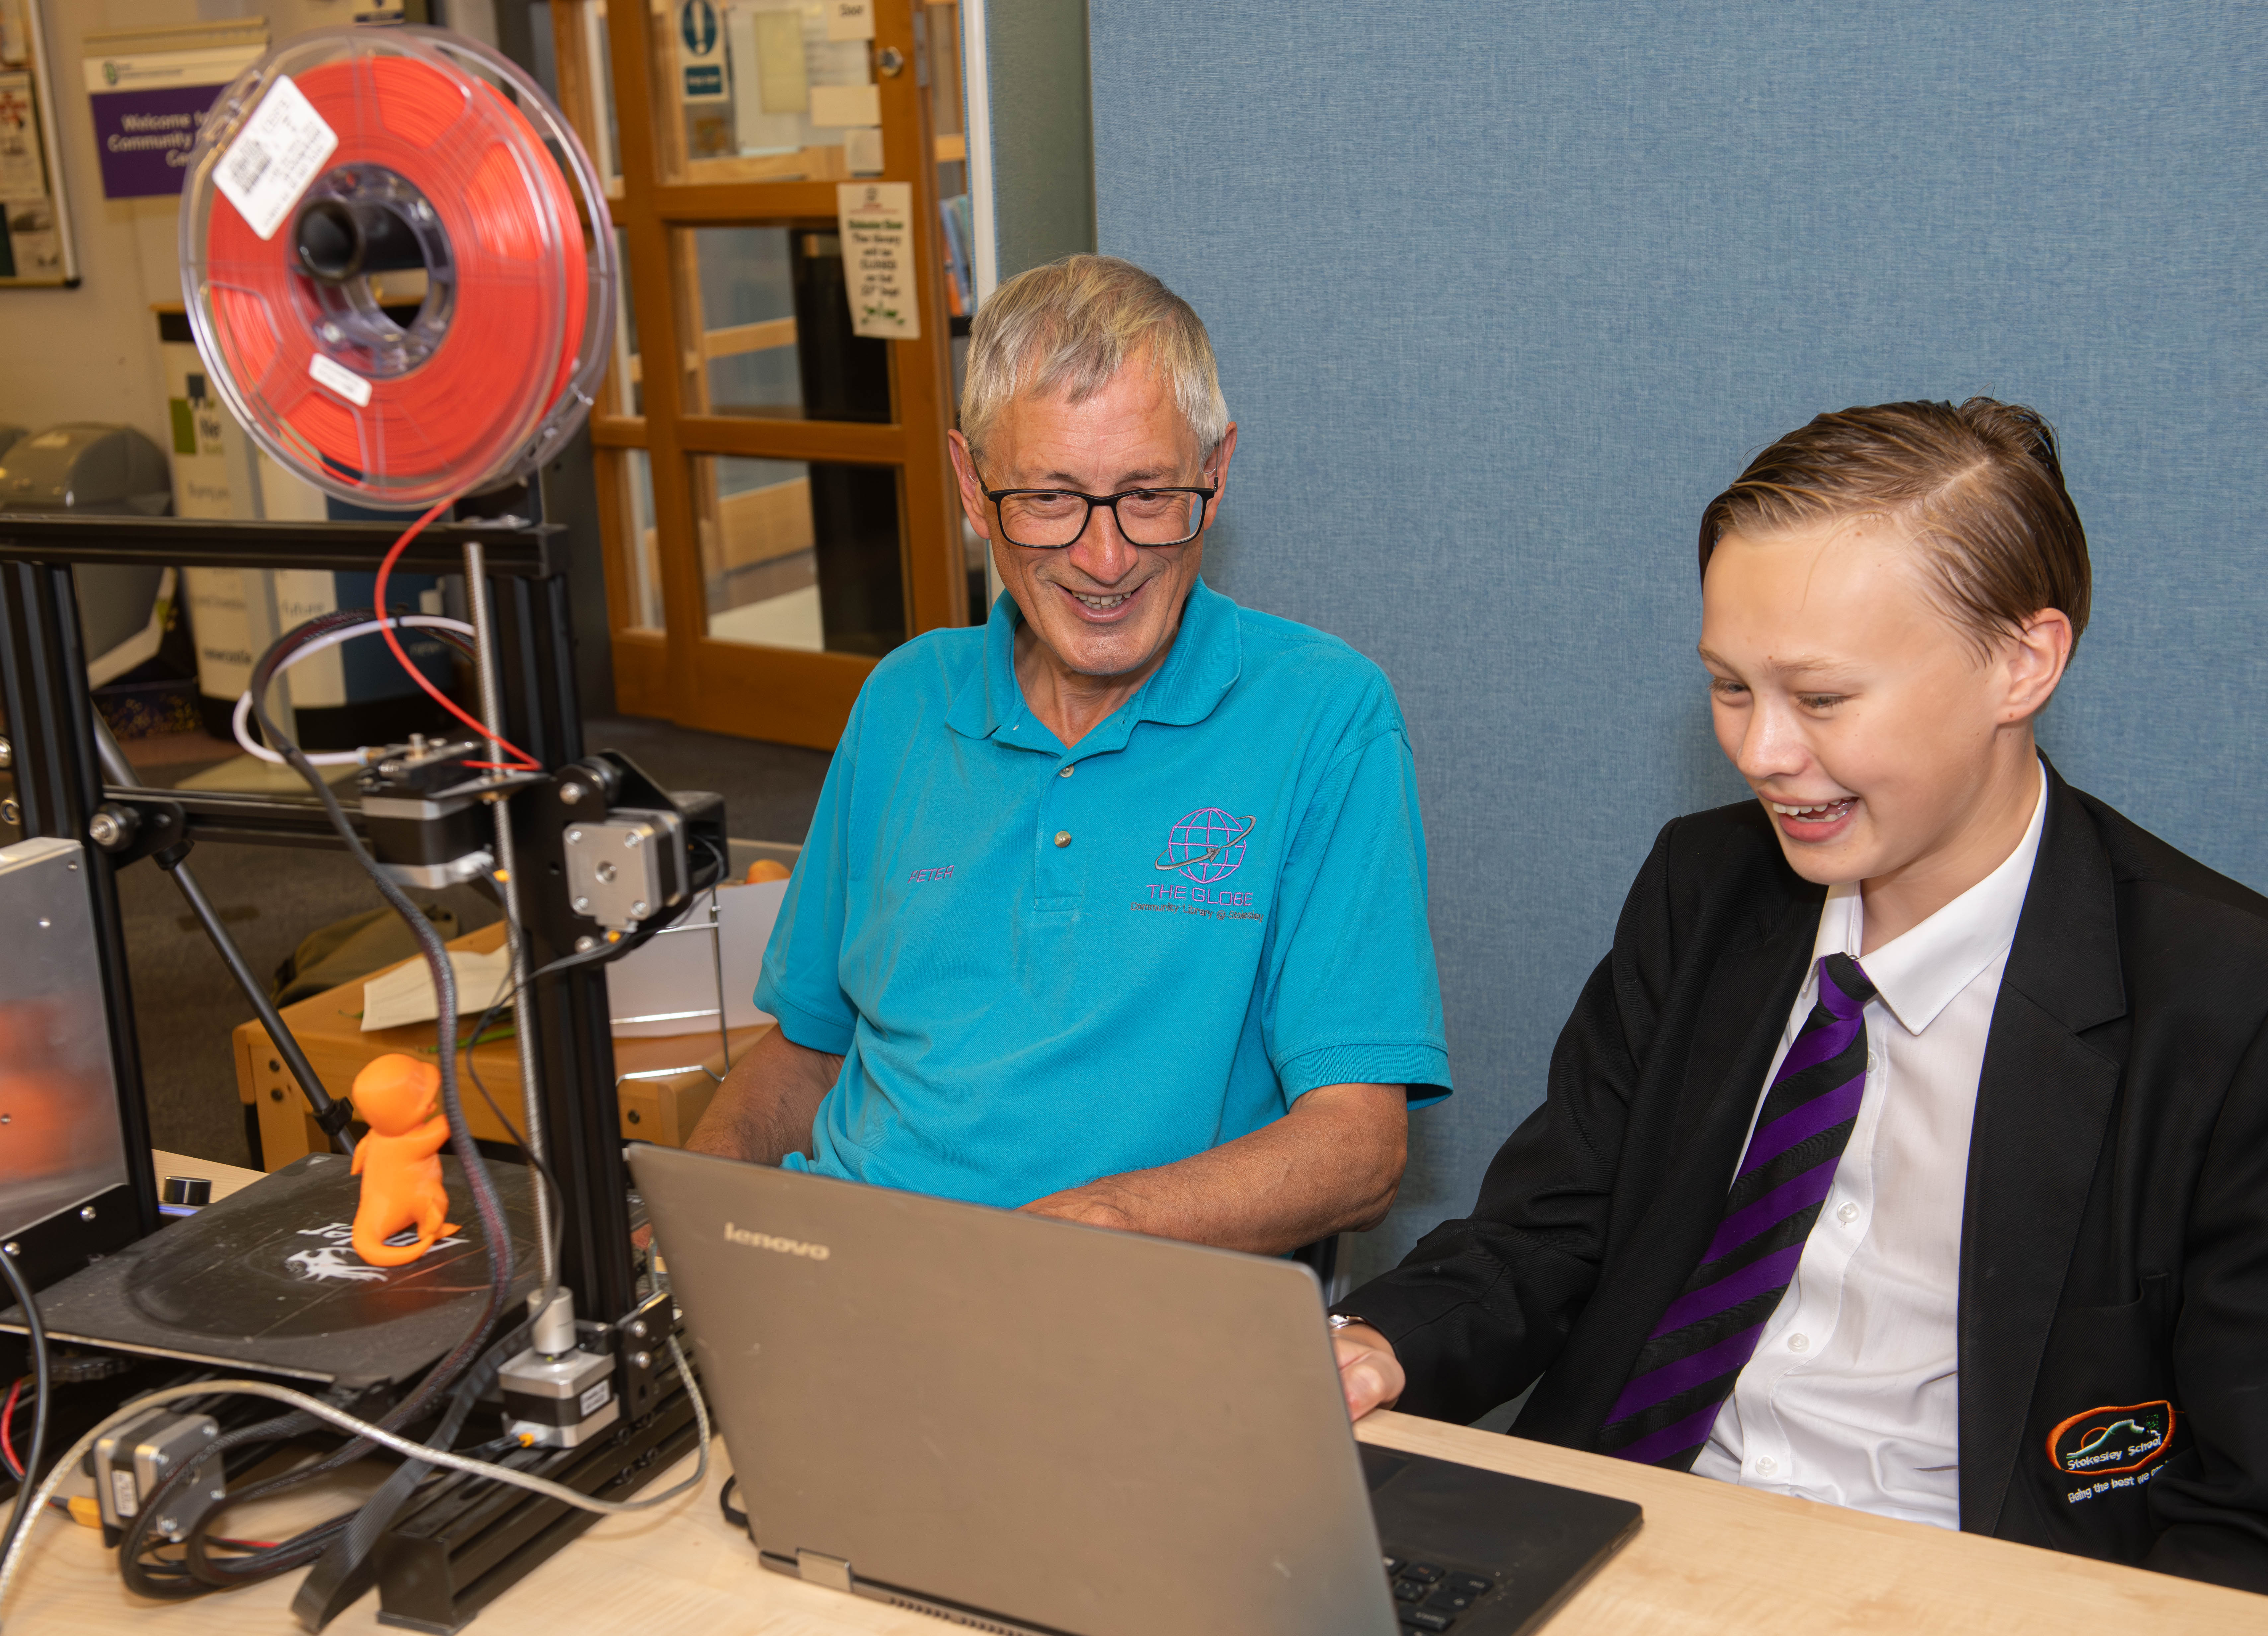 An IT buddy volunteer with a young child at a 3D printer and laptop